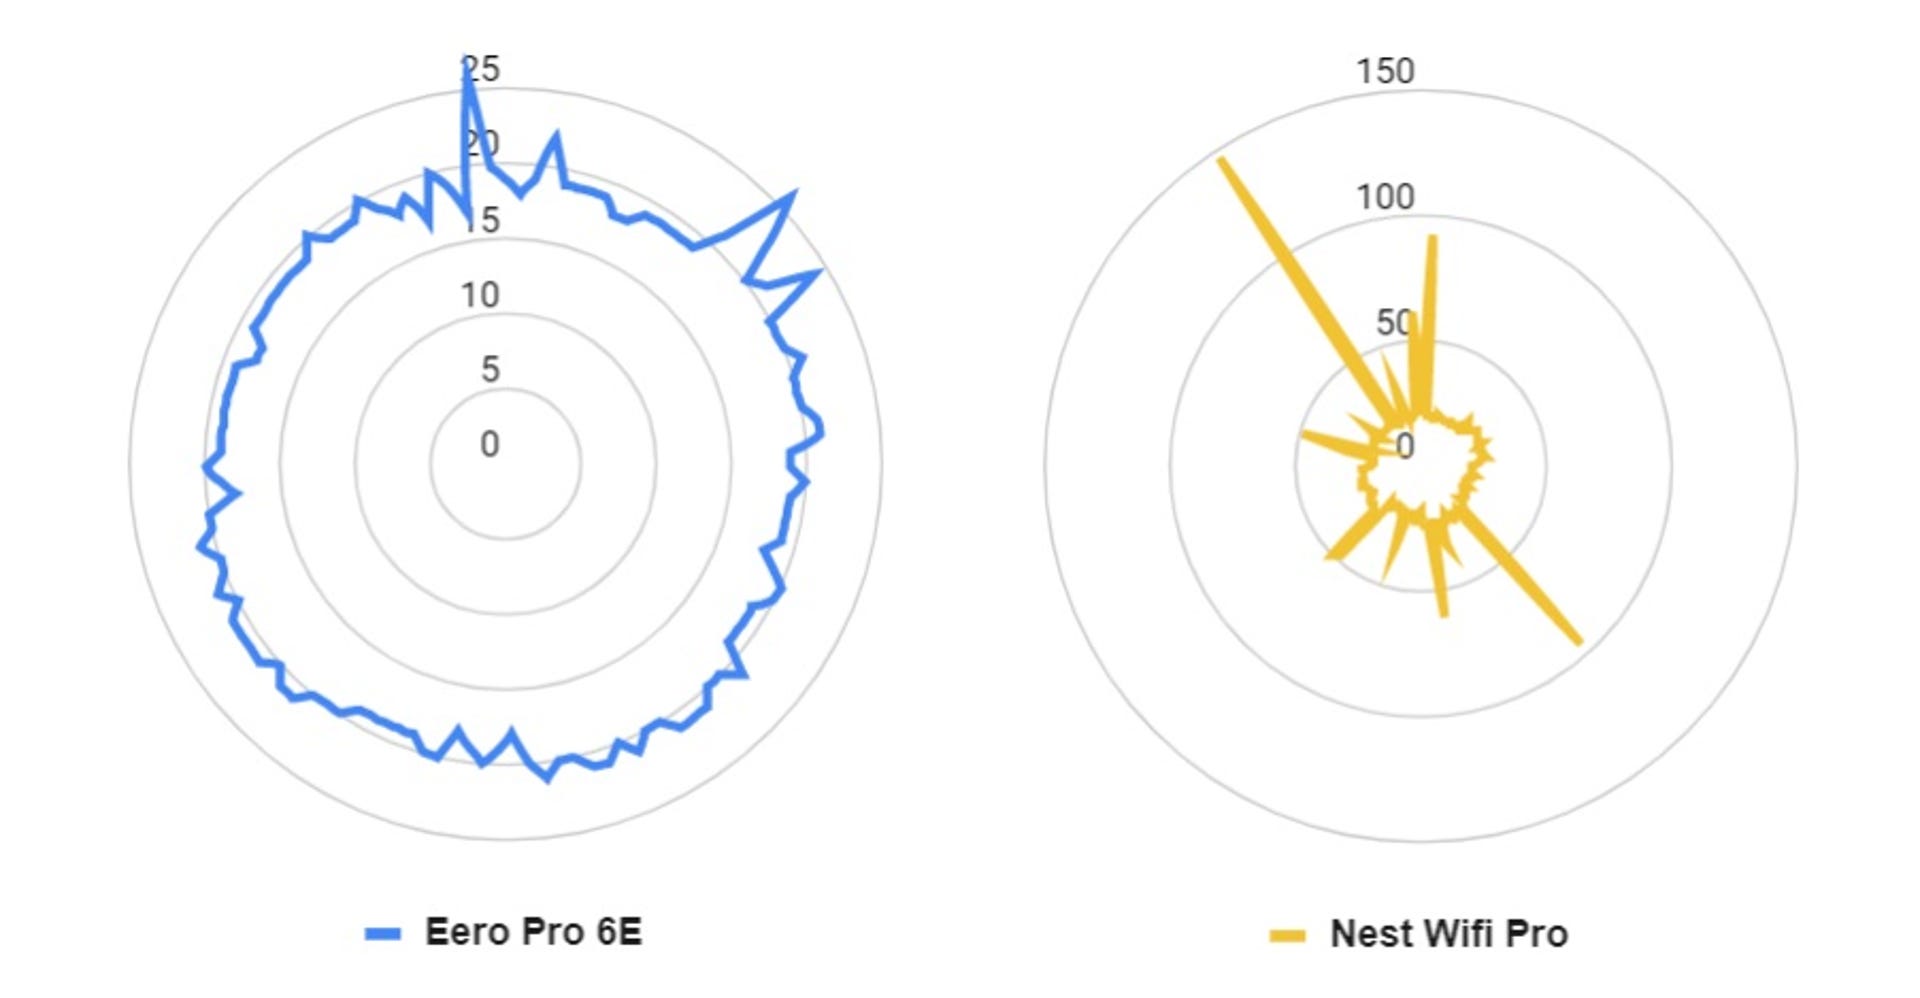 A pair of radar graphs shows the latency we recorded while testing out the Eero Pro 6E and the Nest Wifi Pro mesh systems. The Eero Pro 6E stuck to a baseline of around 20ms for the majority of tests, with only a few tiny latency spikes of around 25ms. The Nest Wifi Pro system held to 20ms during most tests, too -- but it also saw multiple severe latency spikes as high as 150ms.